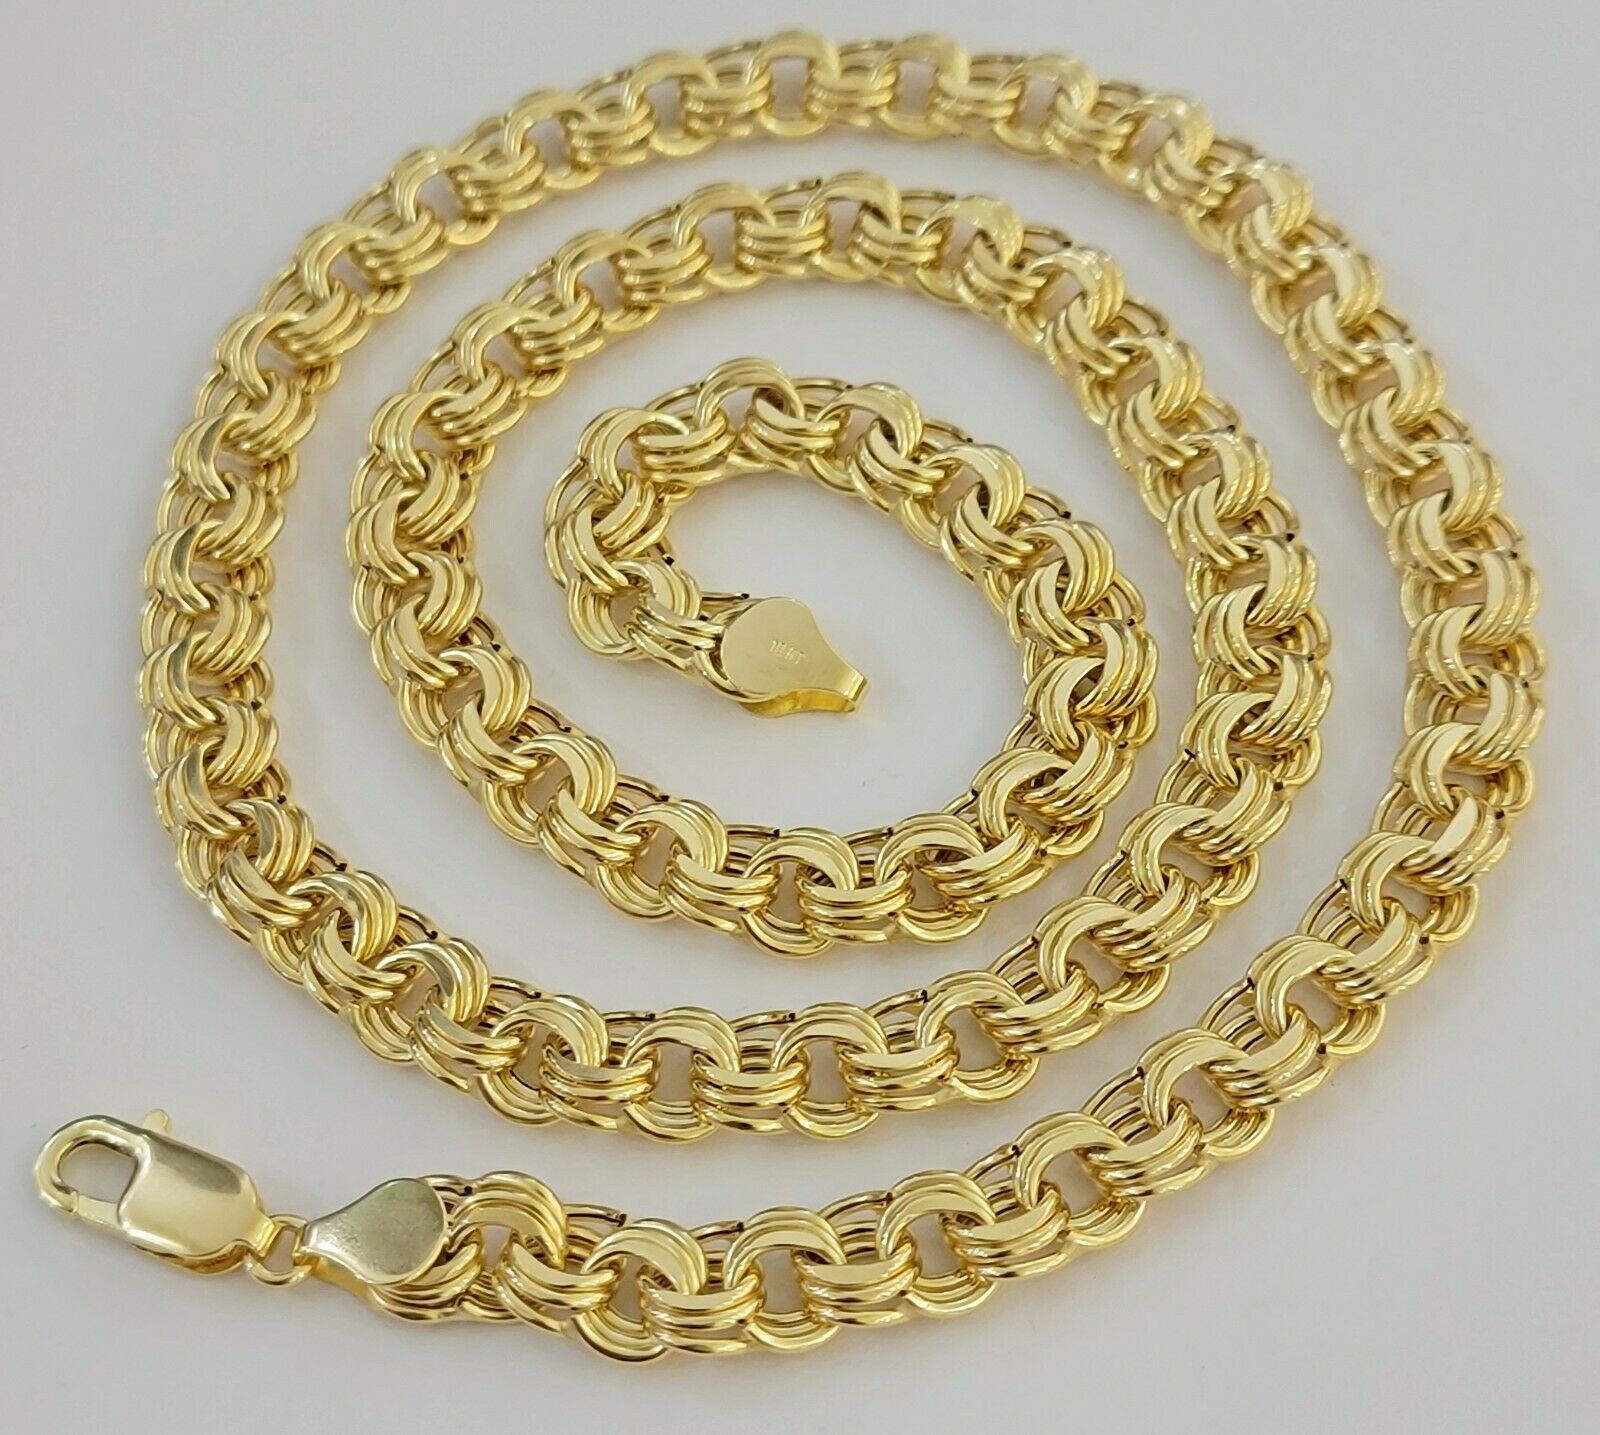 Mens Real Gold Necklace Chino Chain 10k Yellow Gold Chino 8mm 24" Lobster Clasp